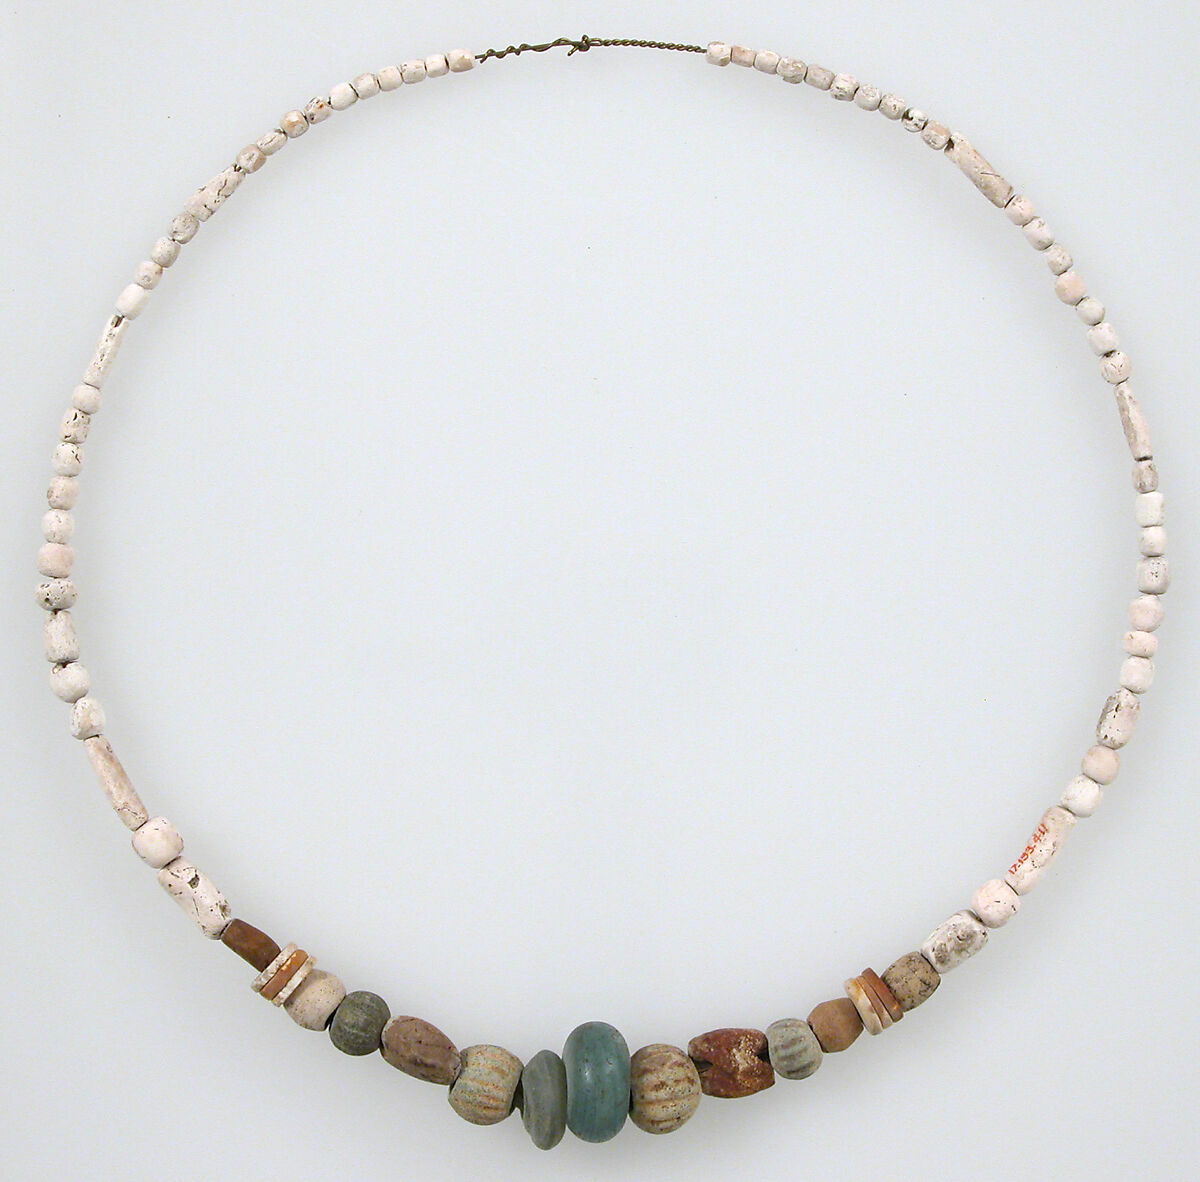 Beaded Necklace, Glass, amber, shell discs, glazed earthenware (faience)calcitic beads (OA XRD:1997b), Frankish (?) 